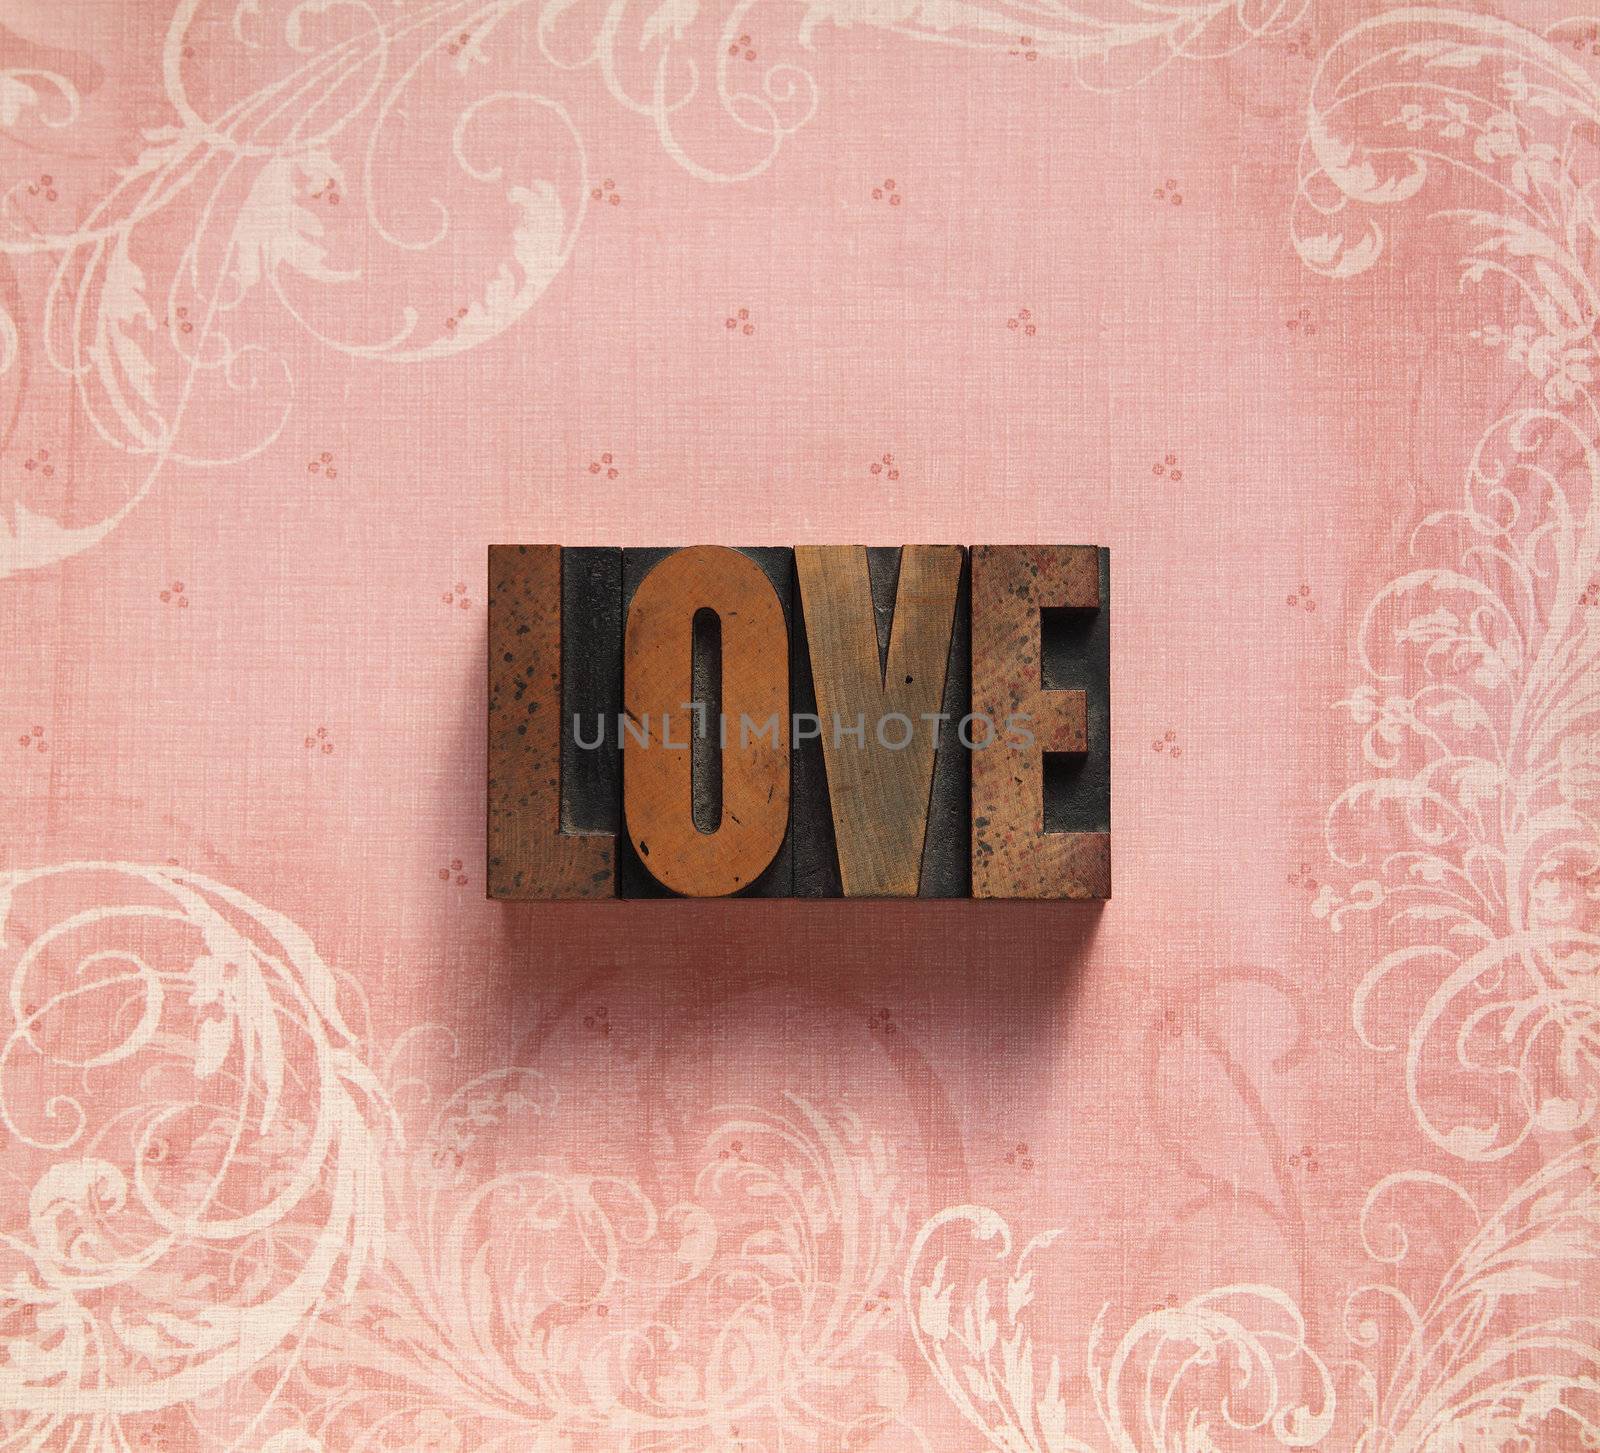 the word 'love' on a pale pink background with decorative swirls